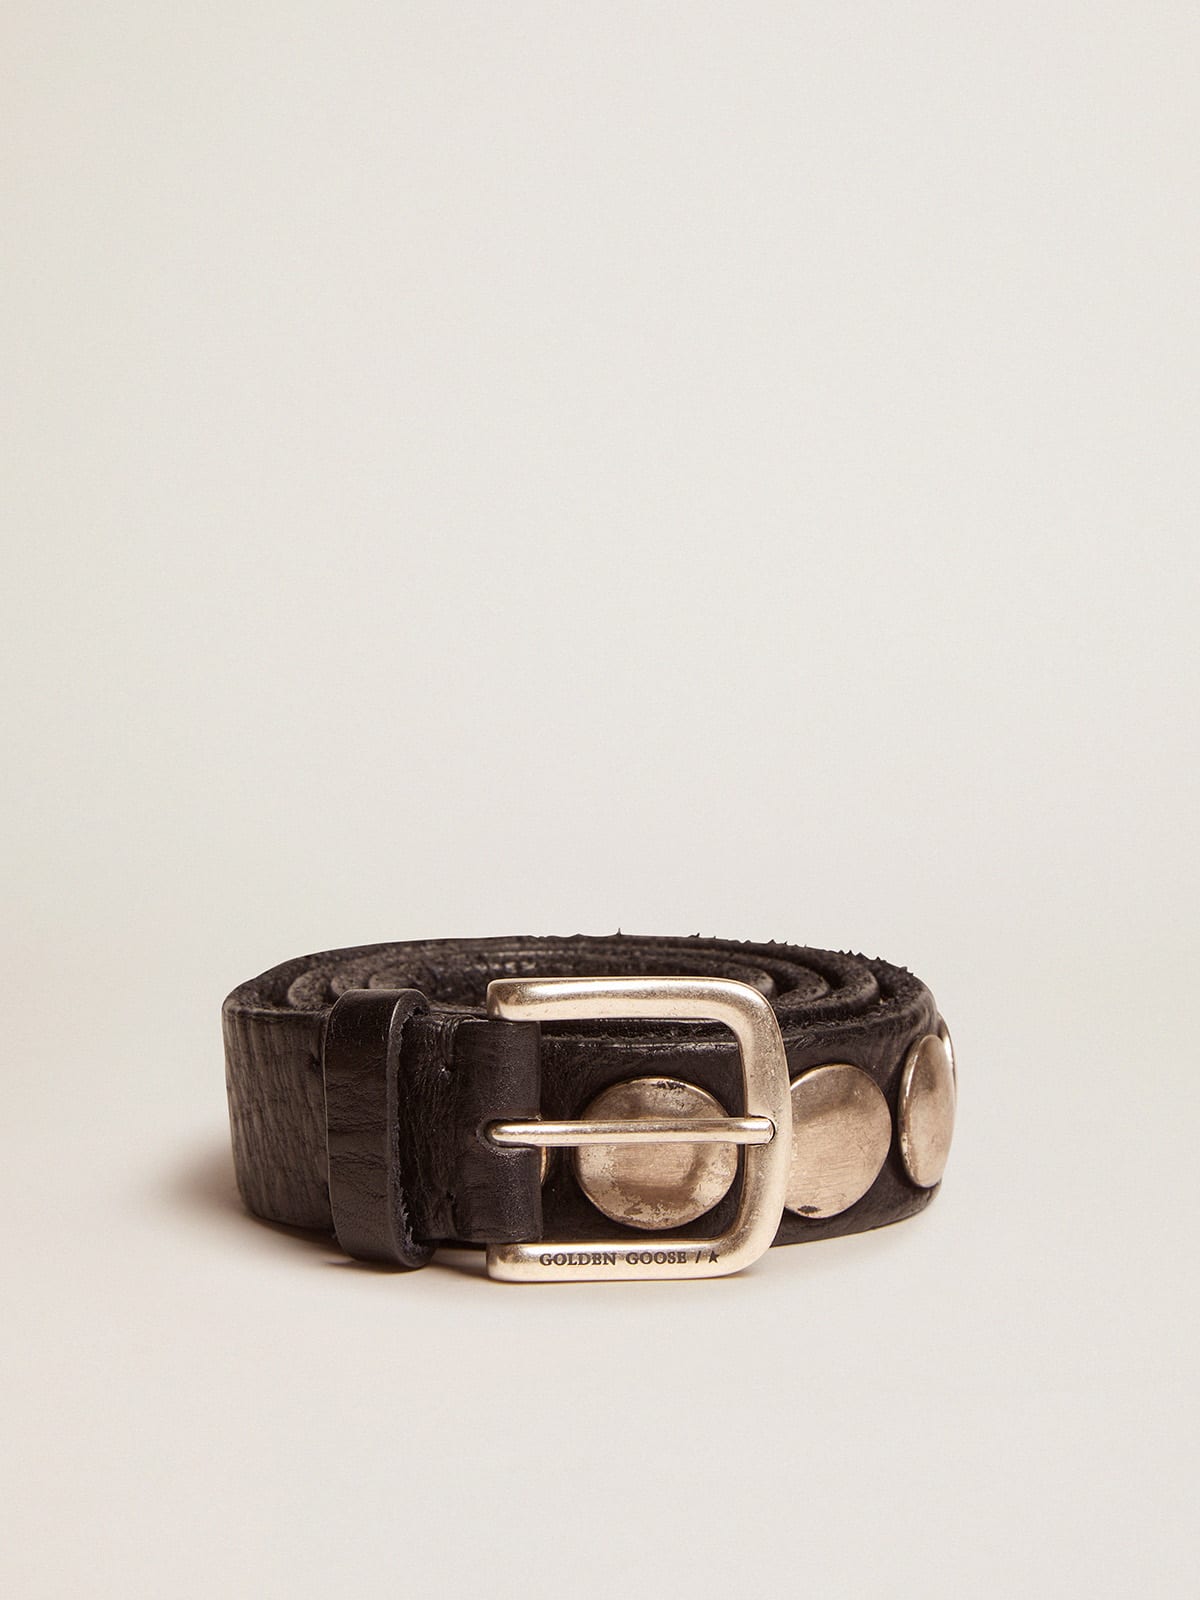 Golden Goose - Black Trinidad belt in washed leather with aged silver color studs in 